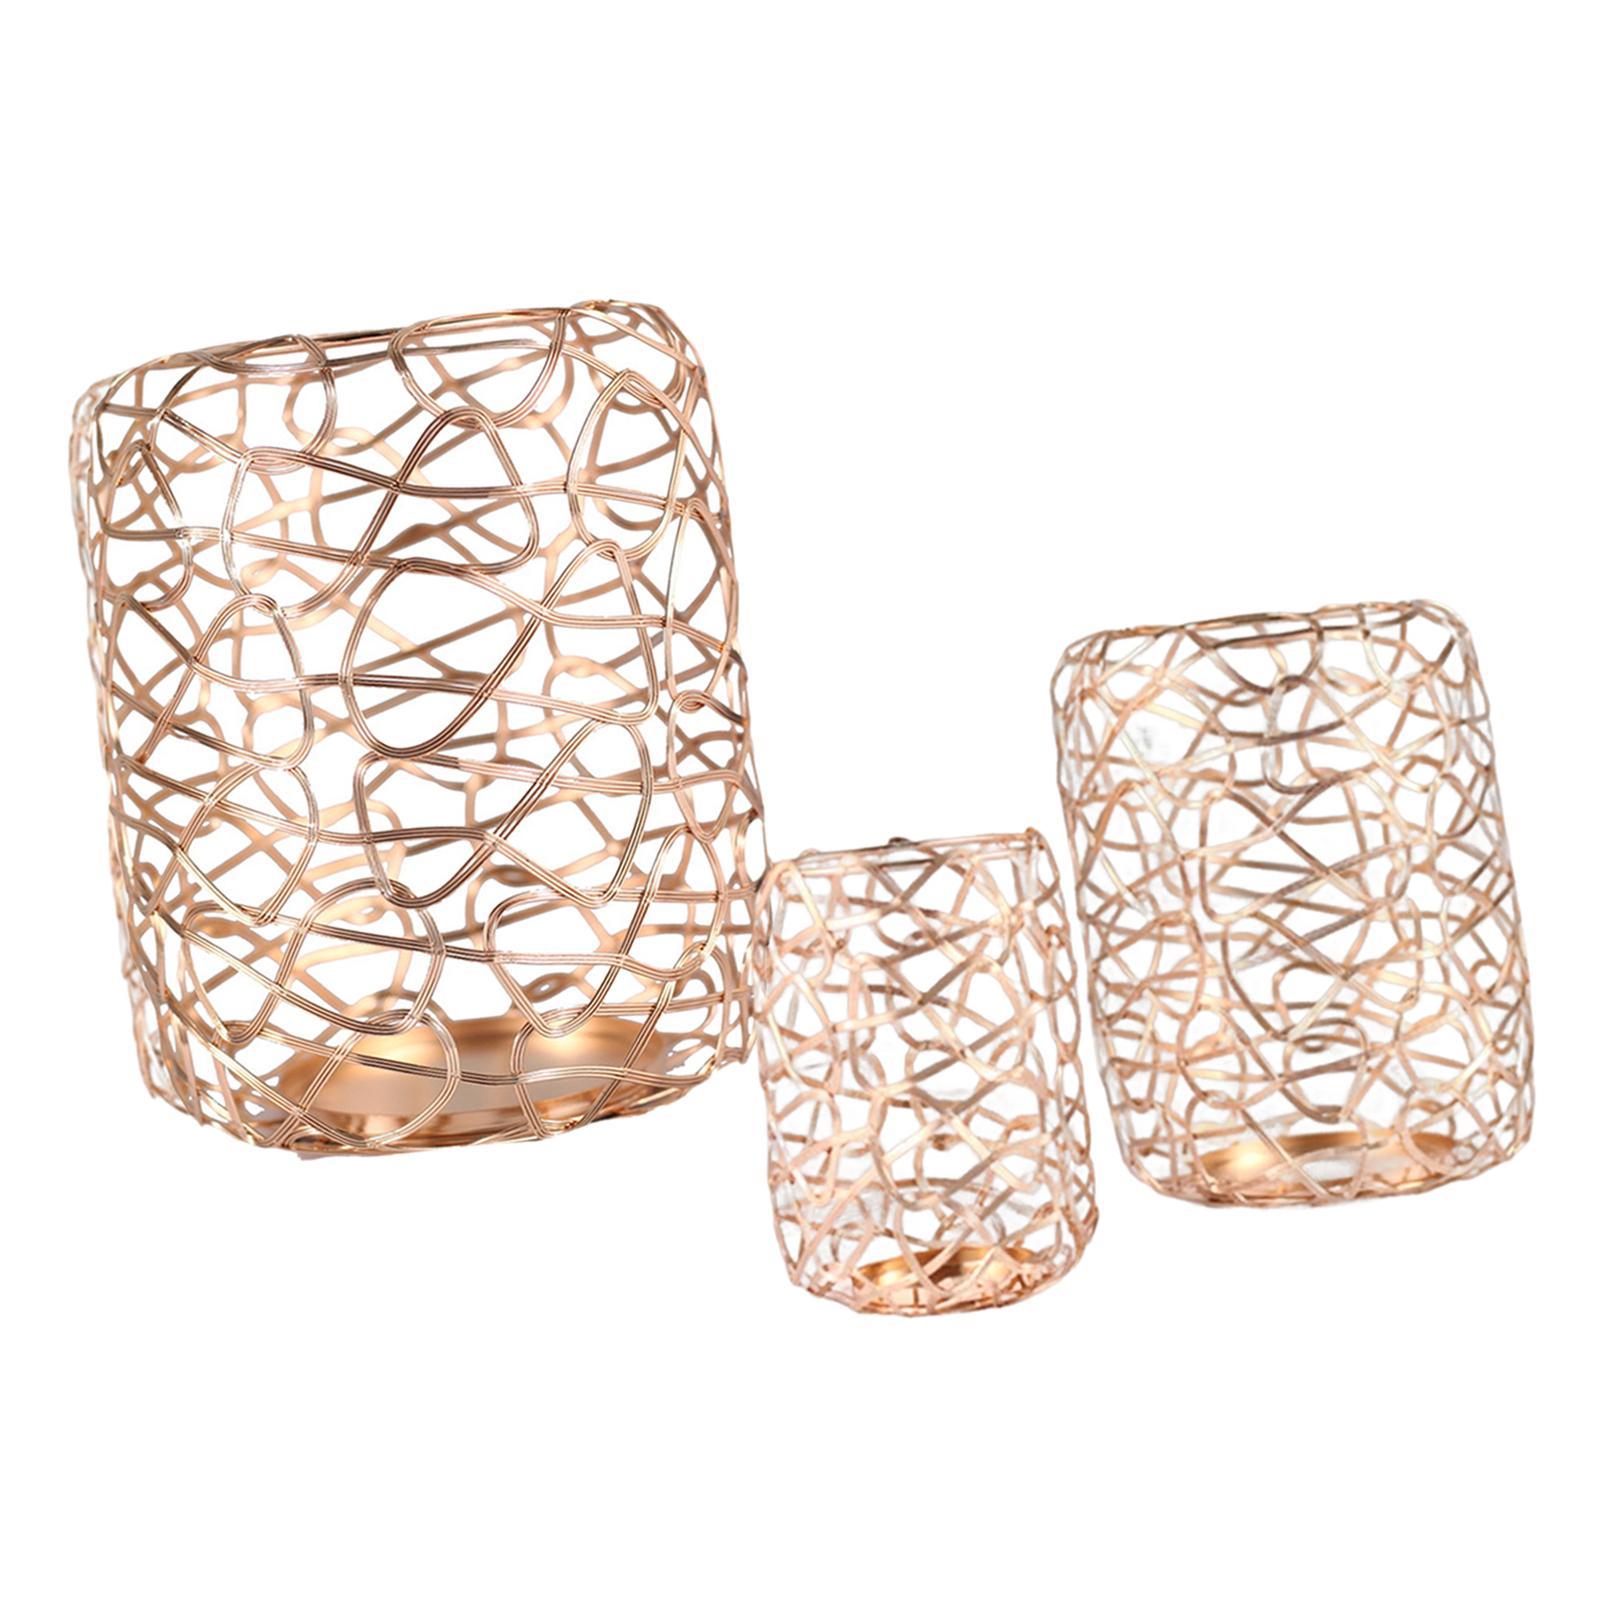 3Pcs Wire Candle Holder Ornaments Pillar Candleholder for Wedding Bedroom